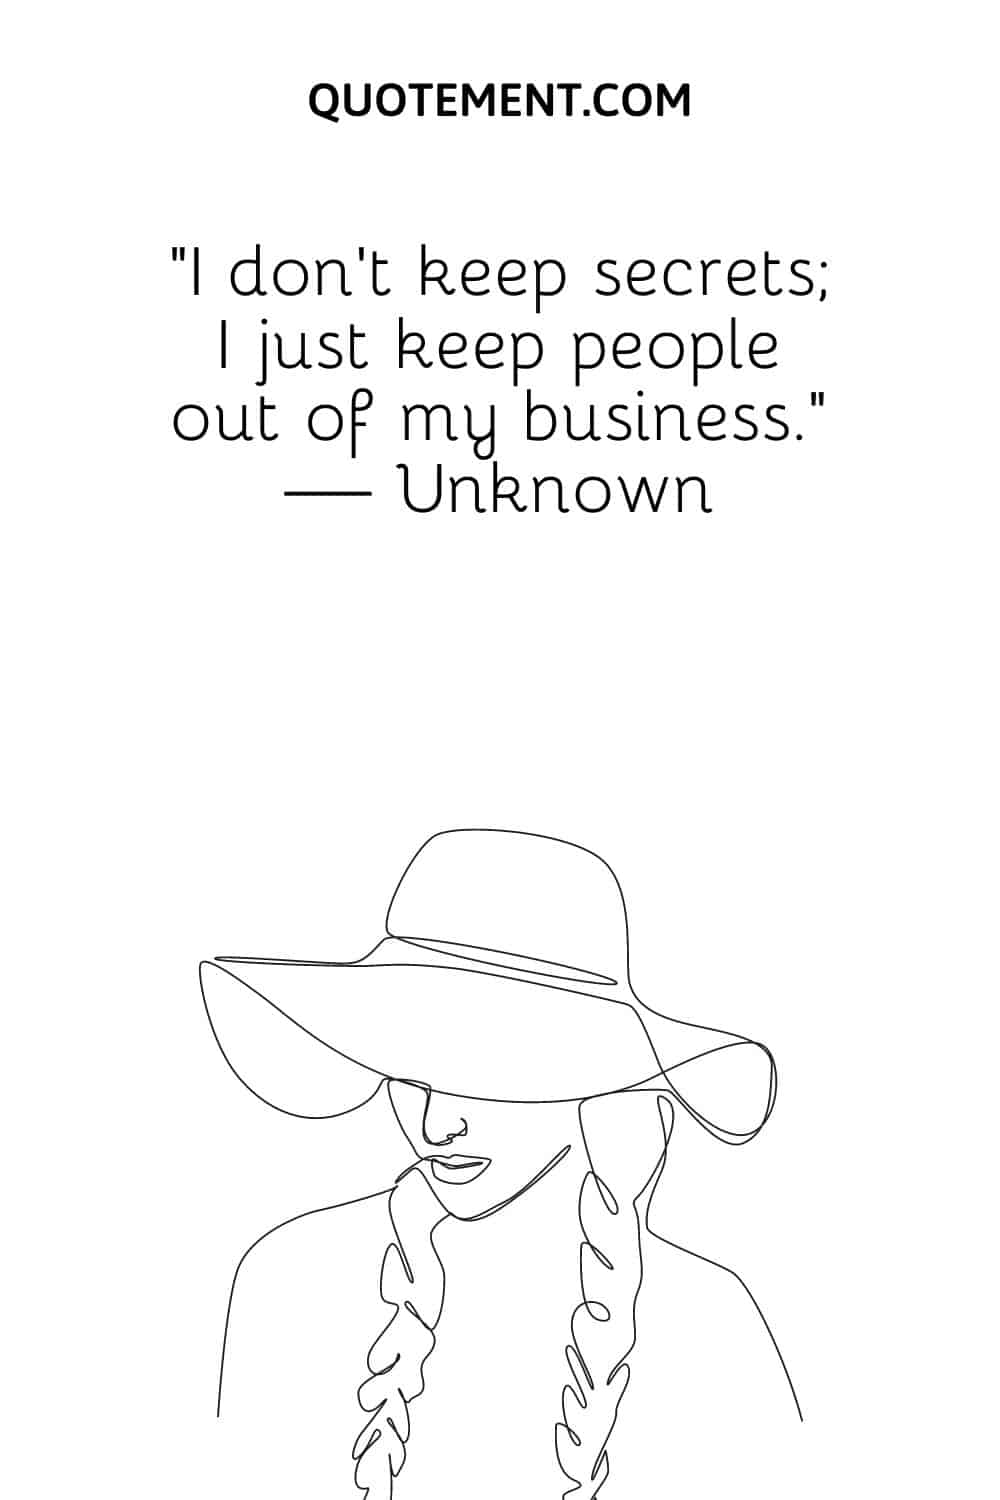 I don’t keep secrets; I just keep people out of my business